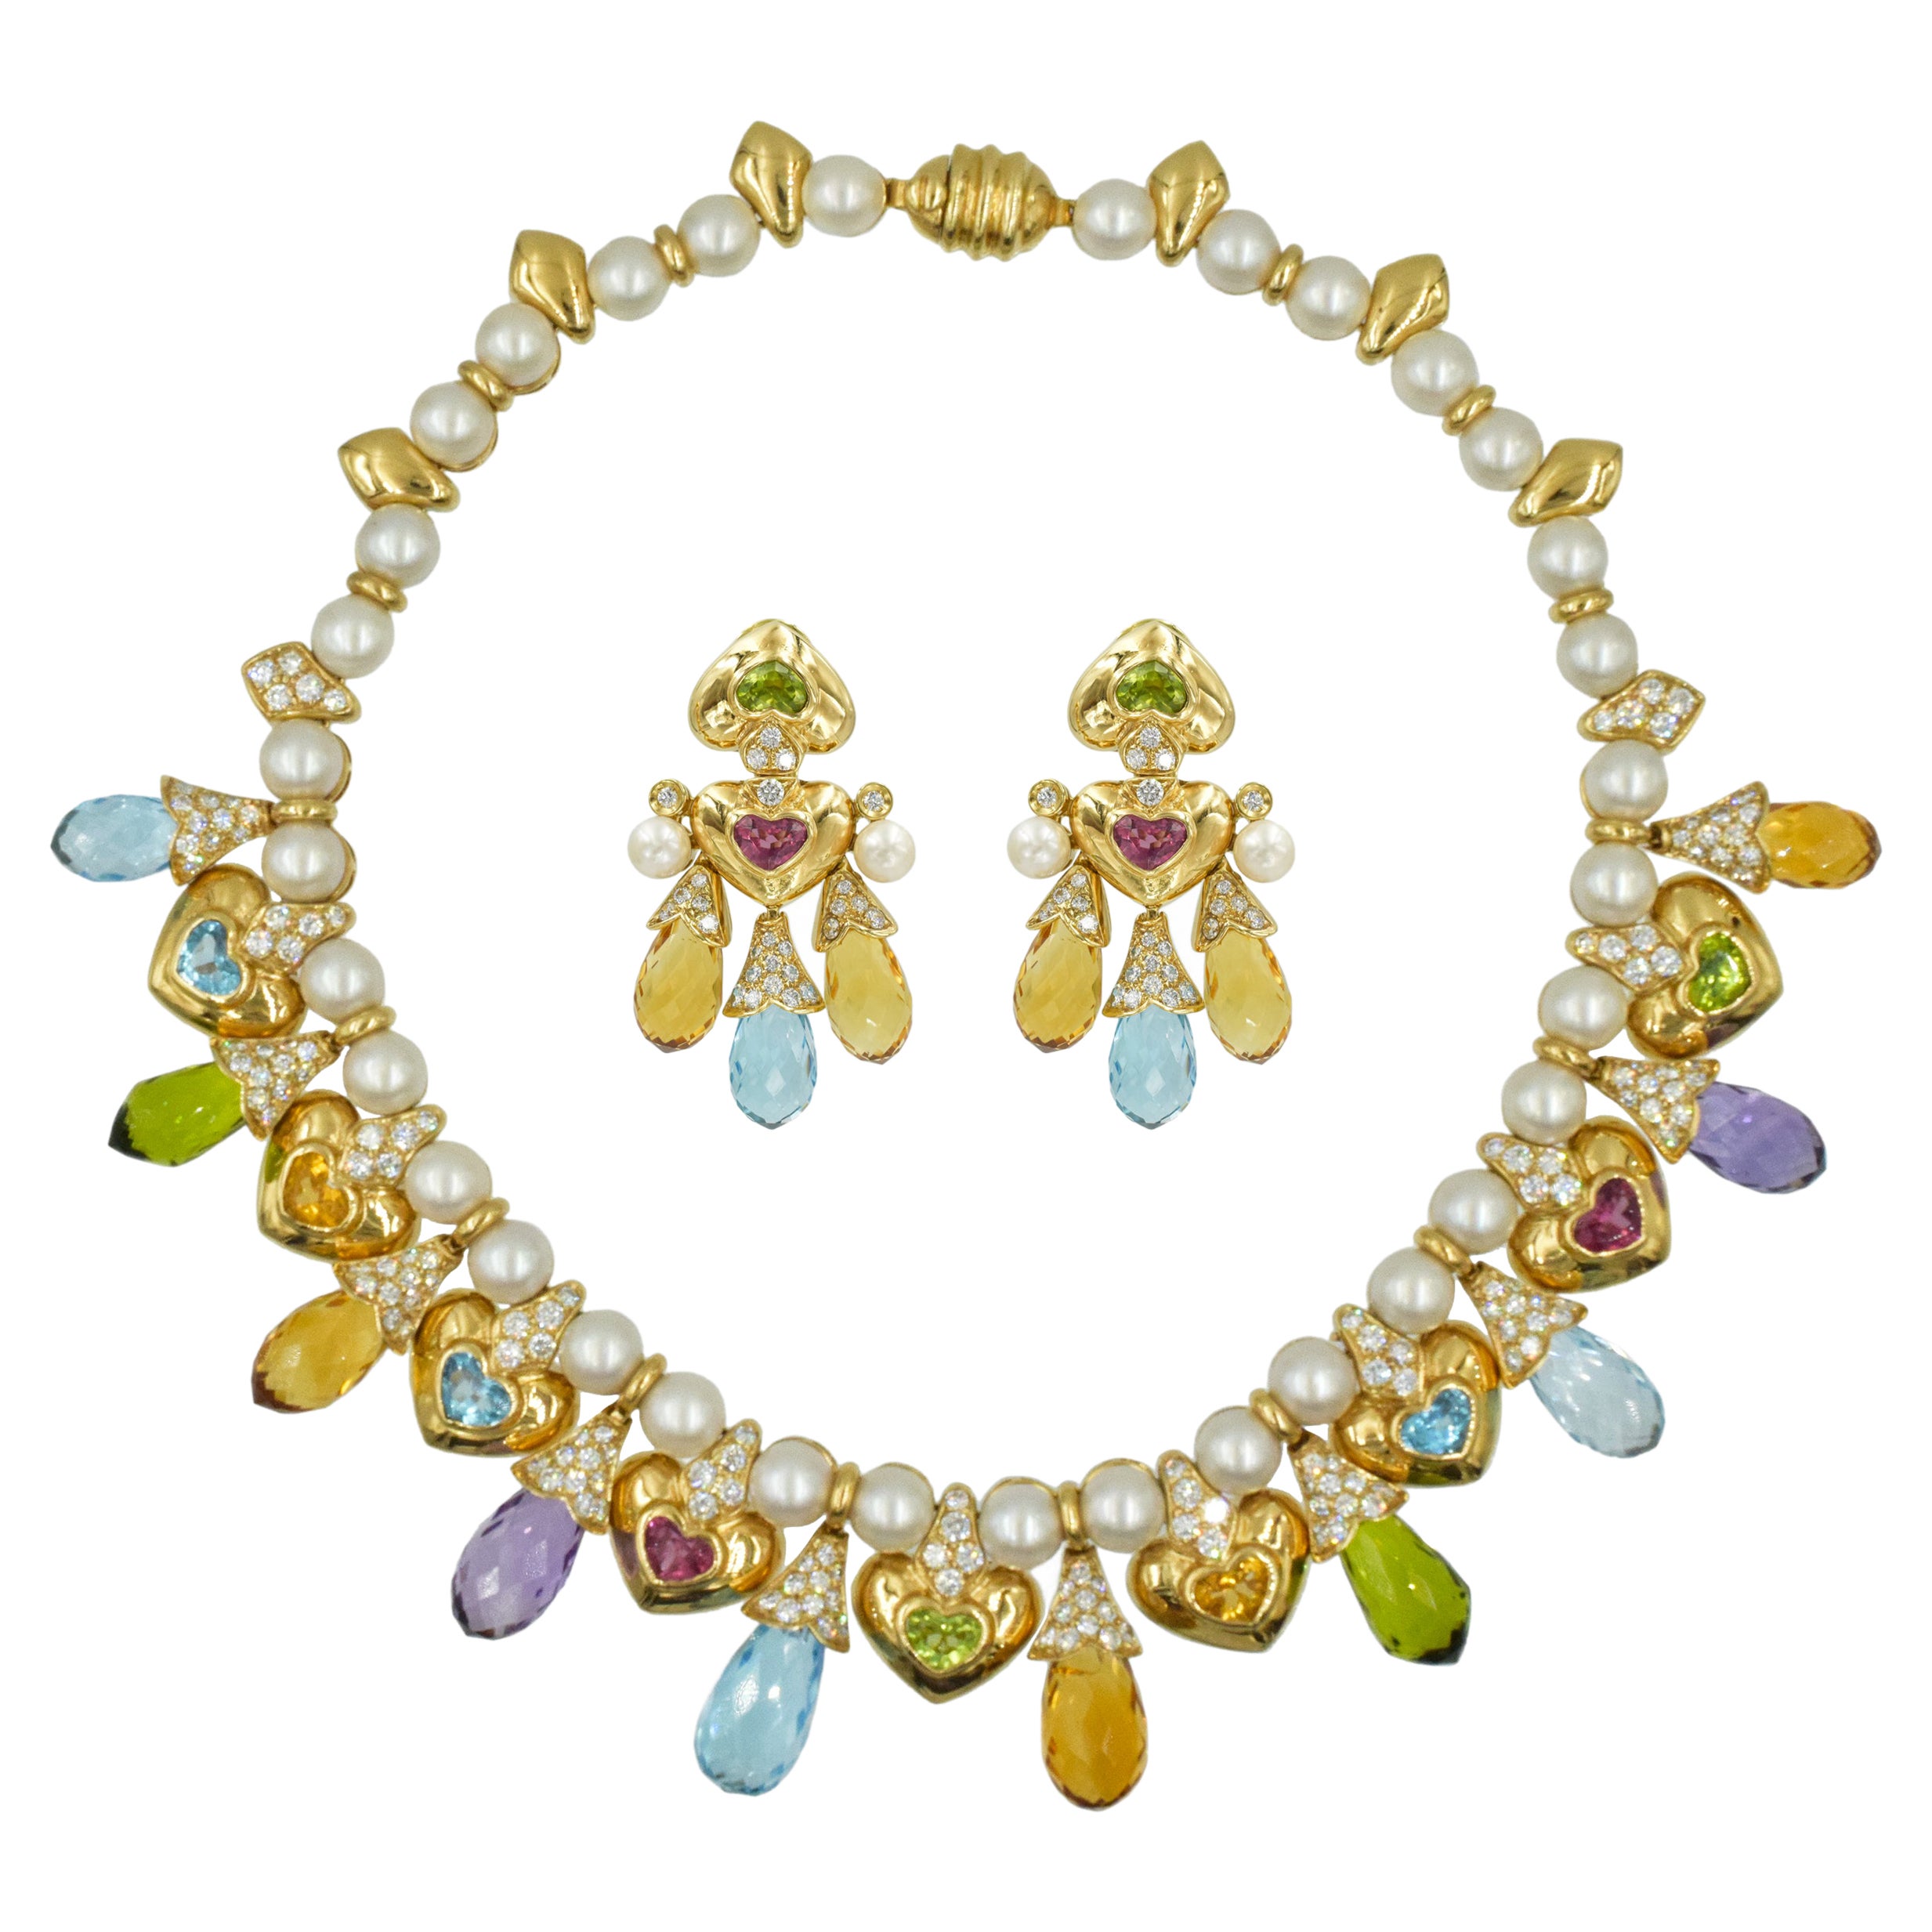 Moussaieff Pearl, Damond and Gemstone Necklace and Earring Set in 18k For Sale